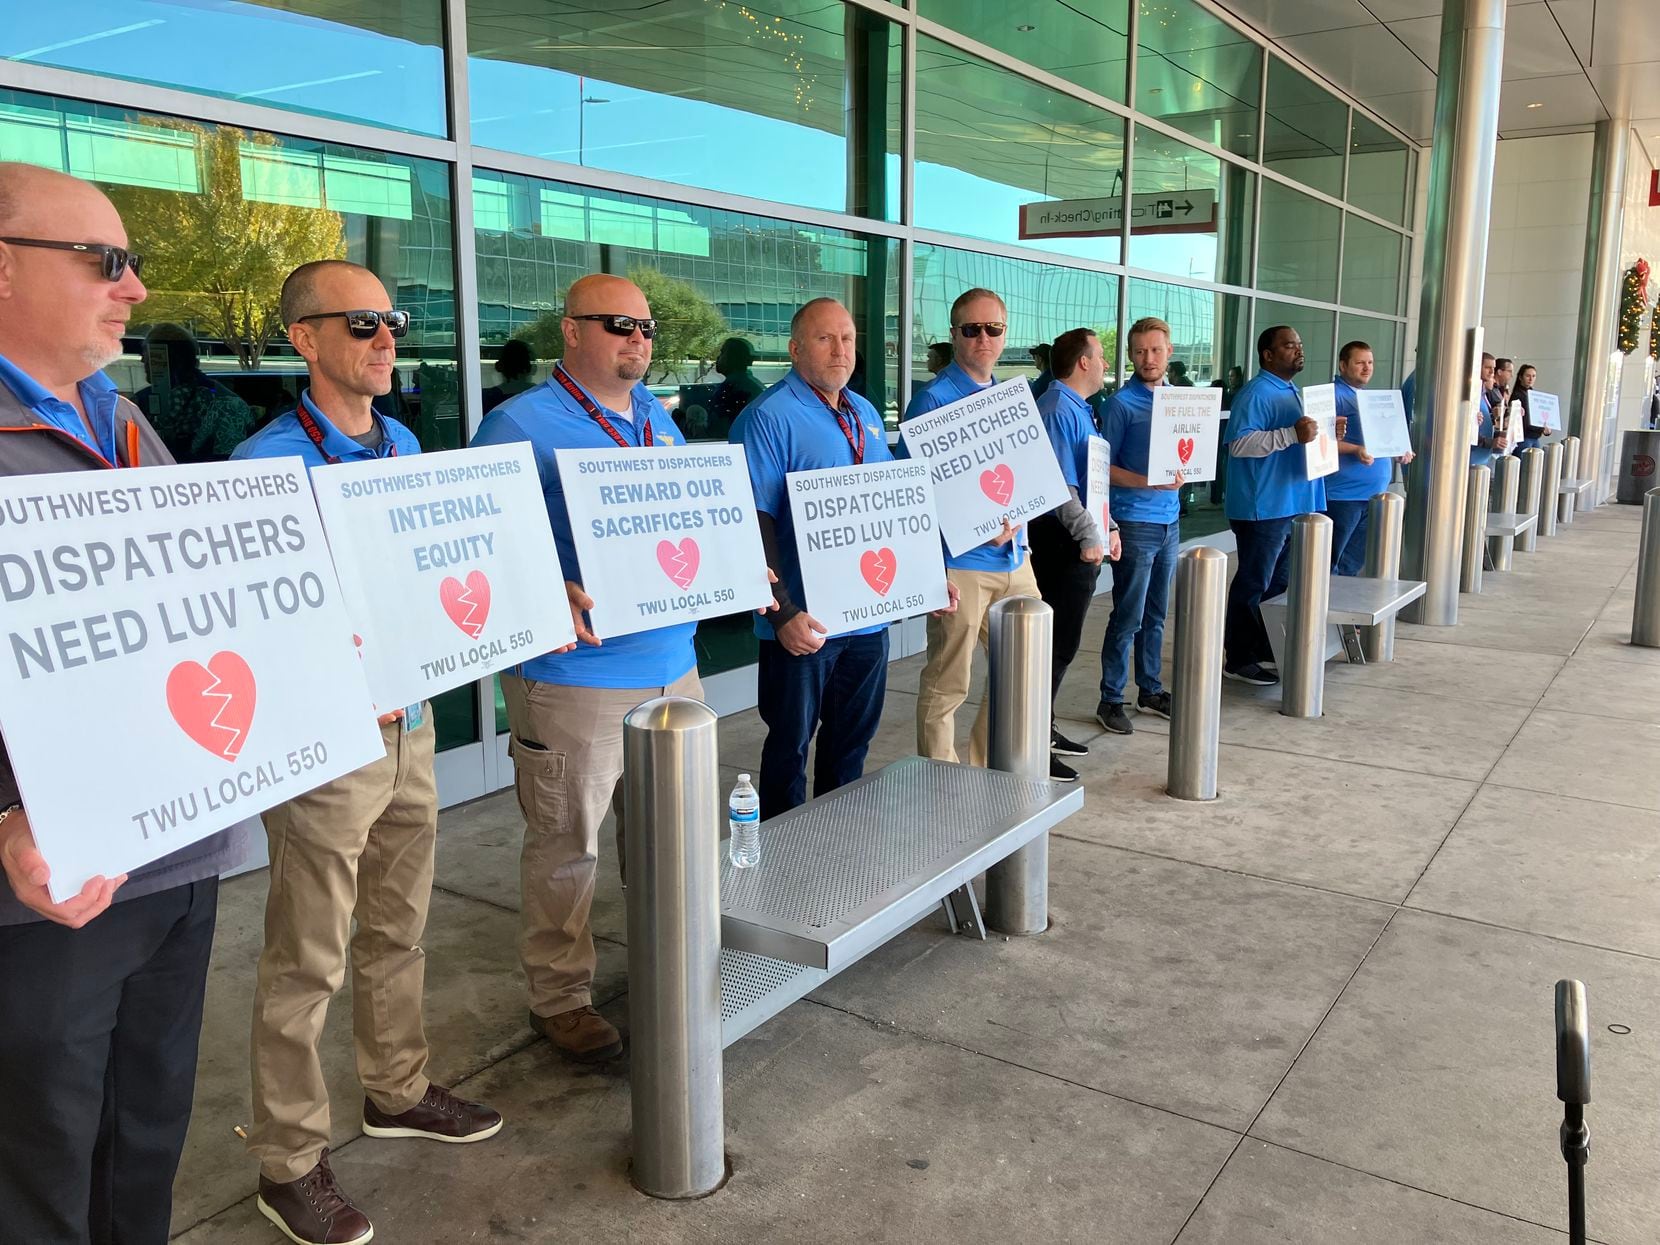 Southwest Airlines union dispatchers with TWU Local 550 demonstrate at Dallas Love Field to...